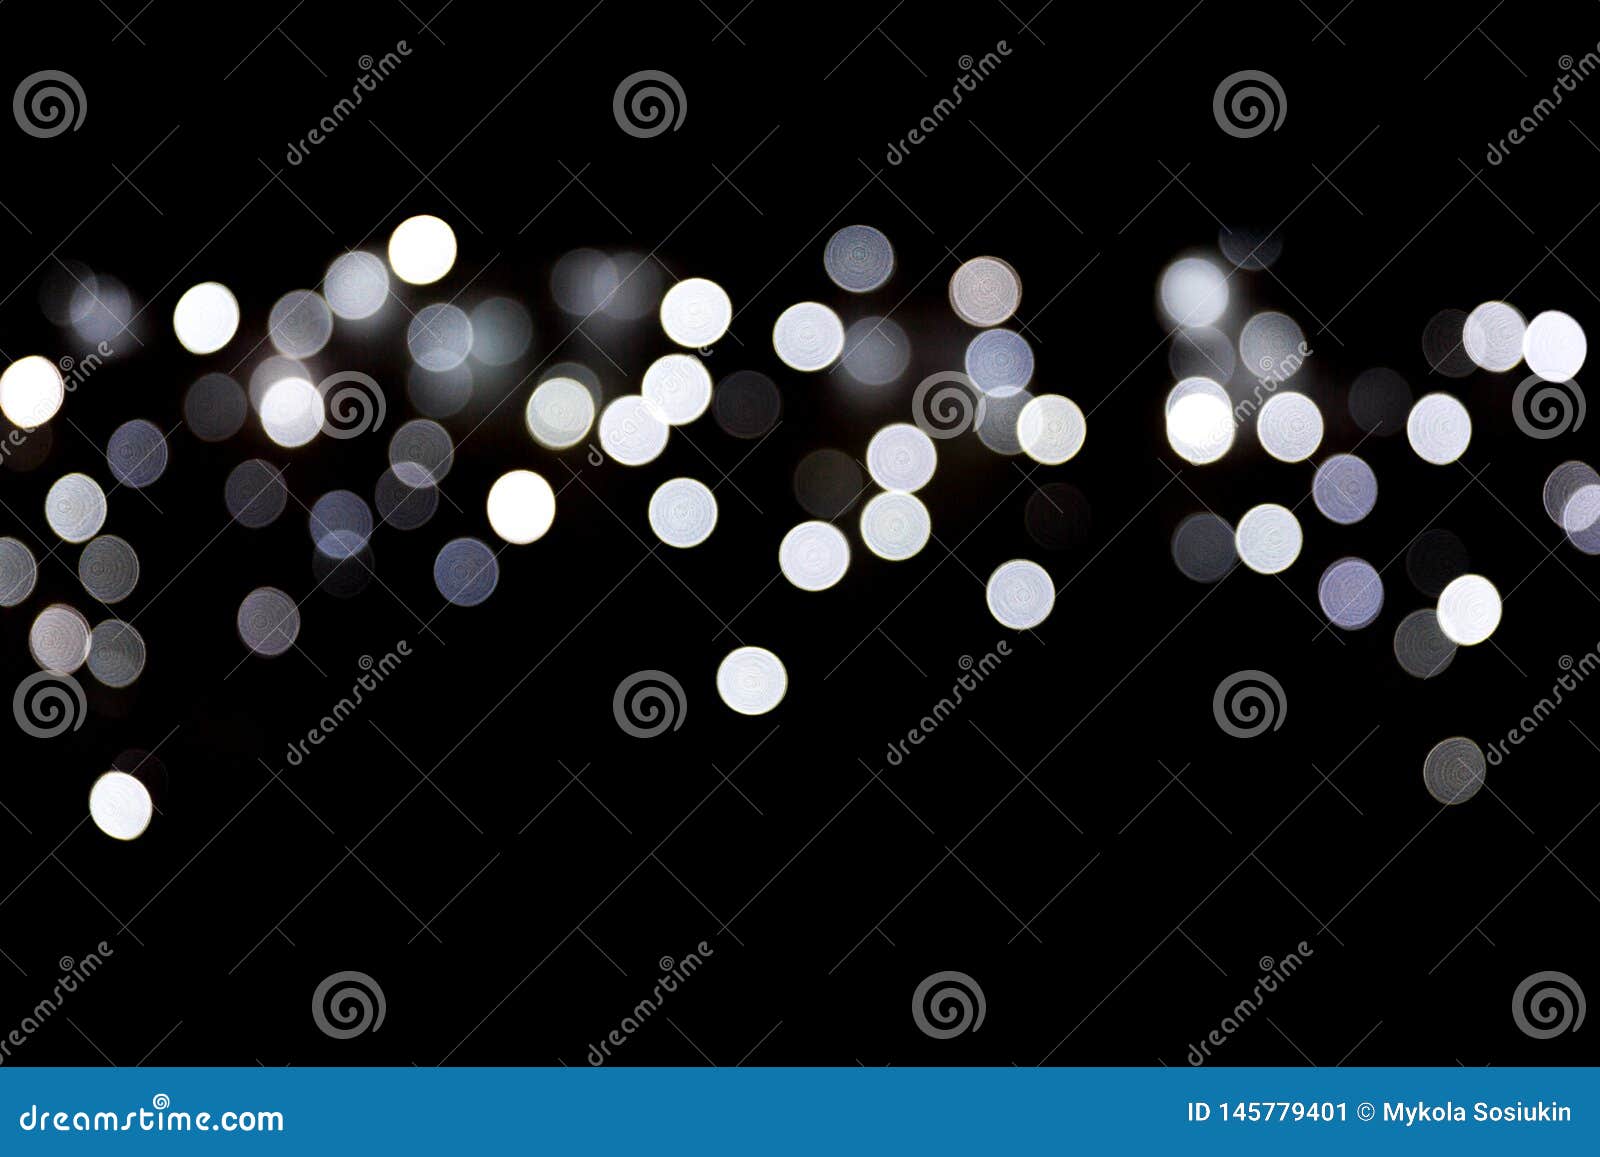 Bokeh White Lights on Black Background, Defocused and Blurred Many ...